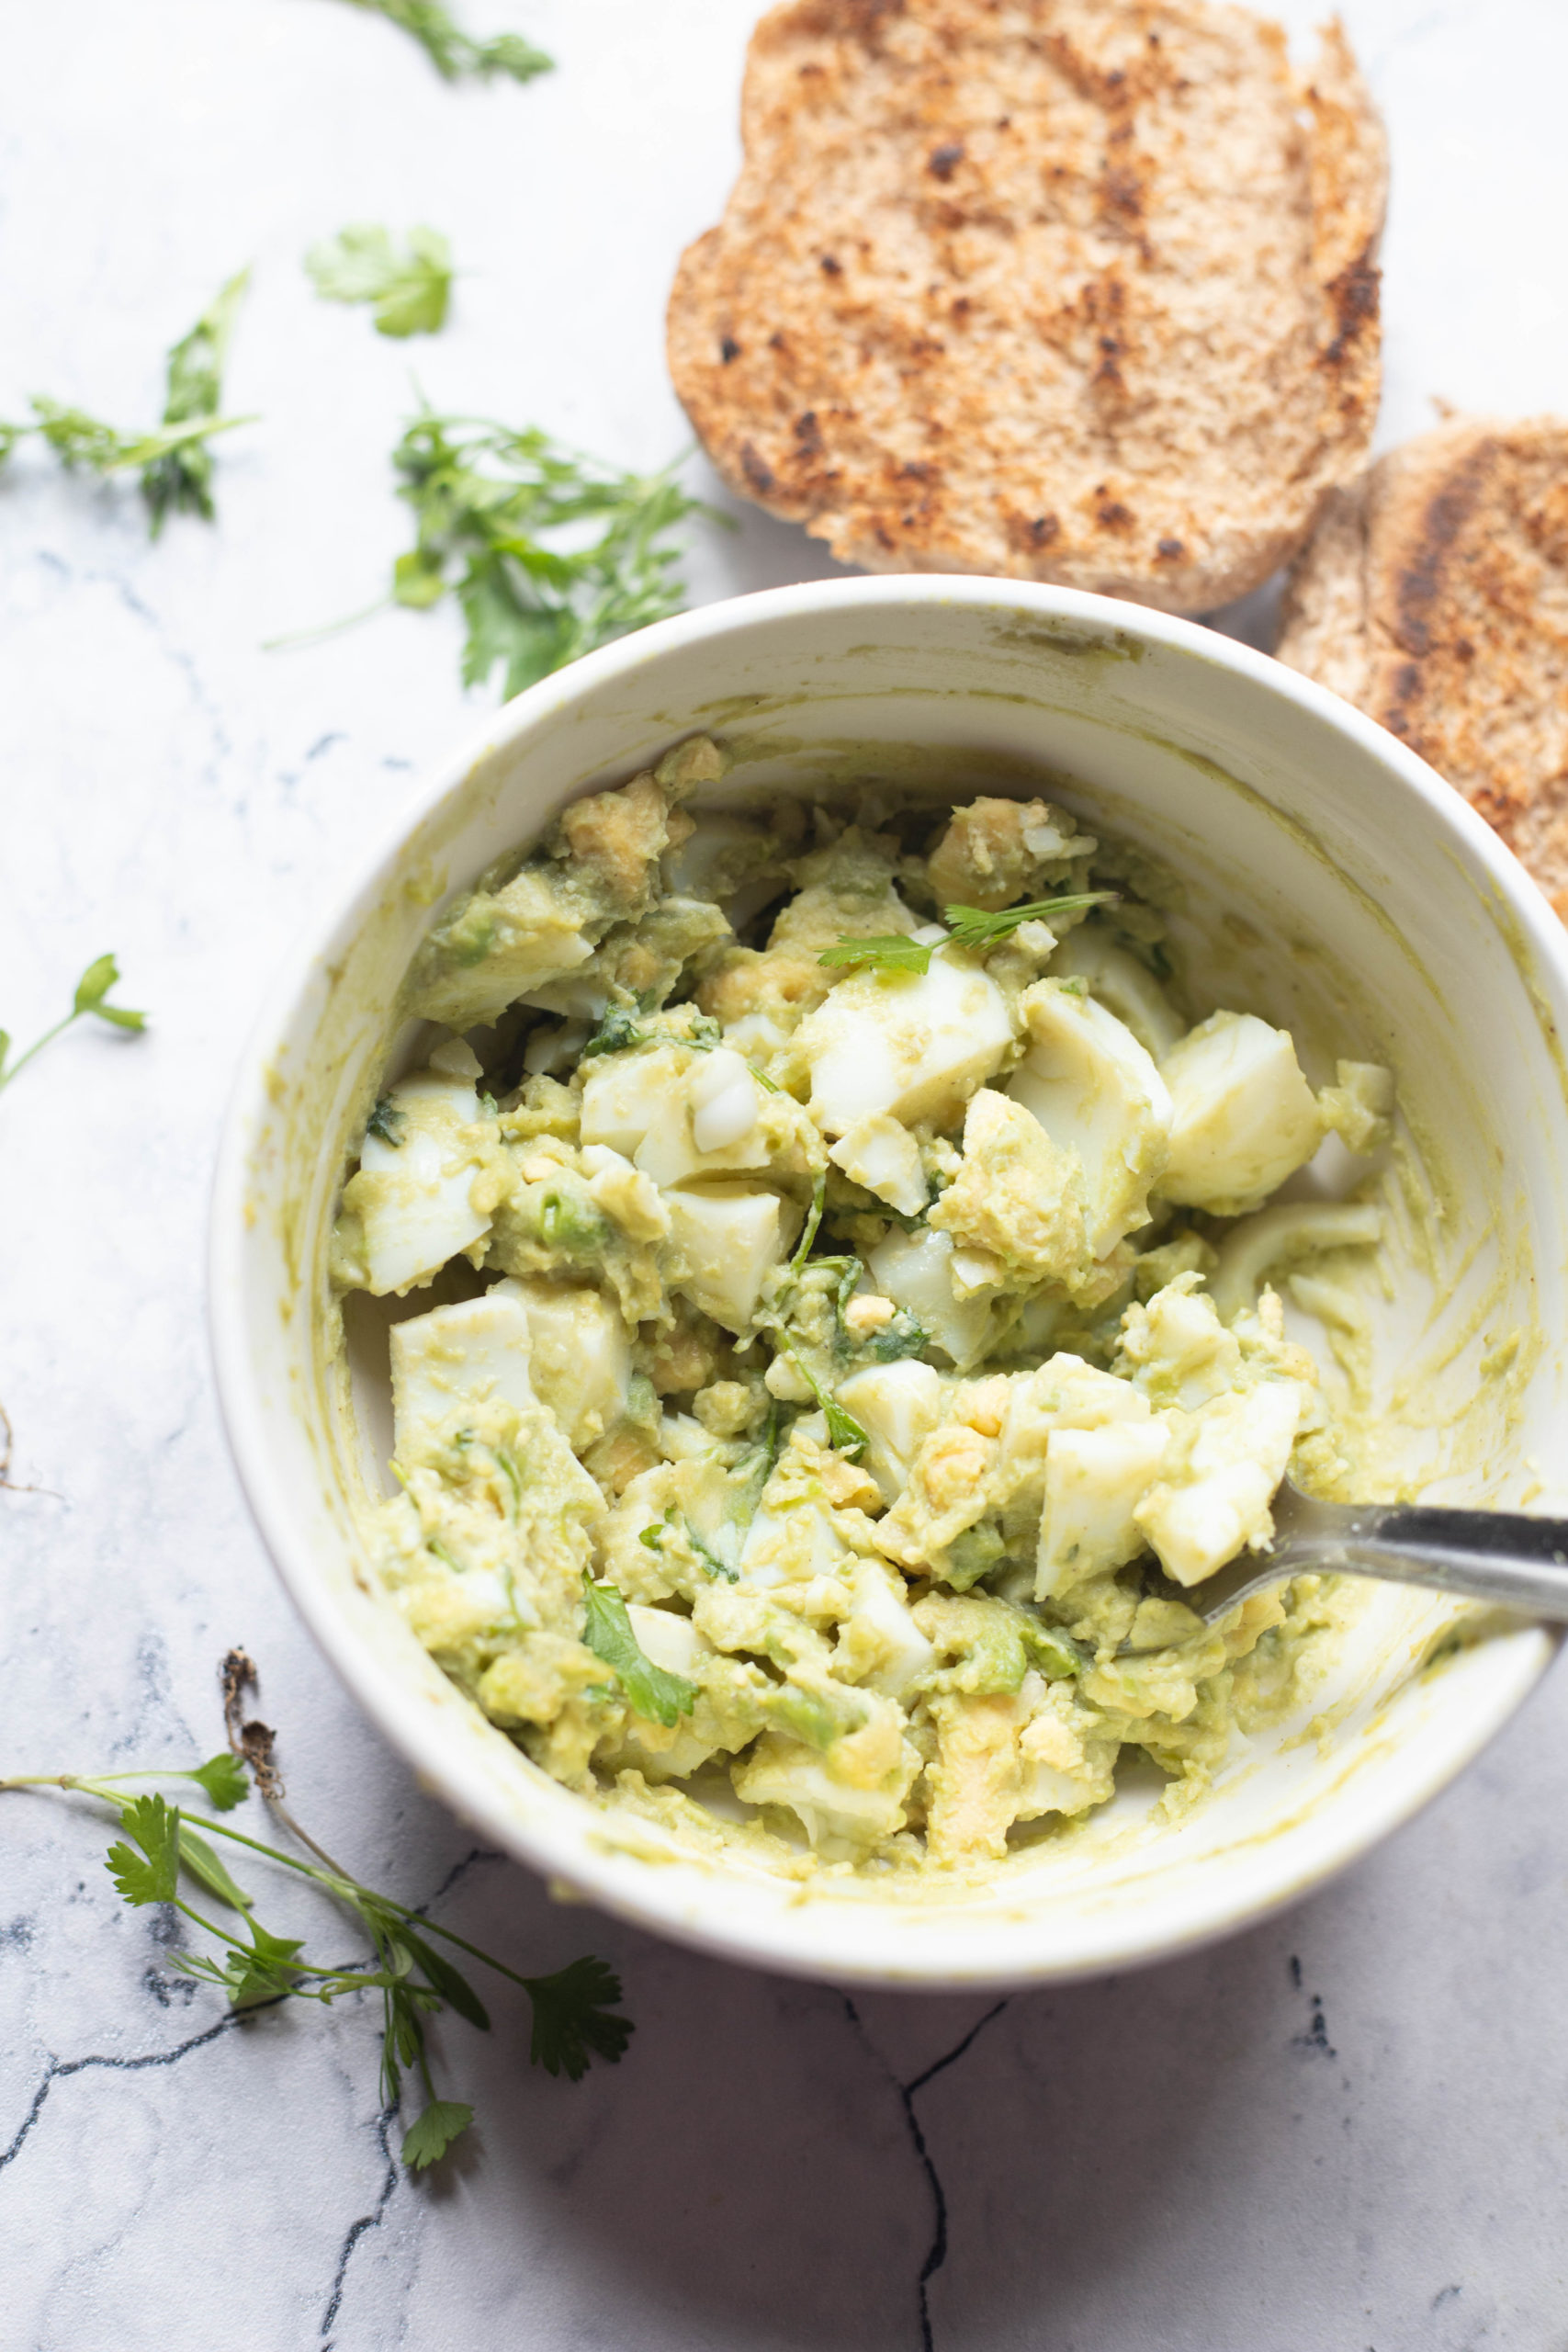 Bowl of avocado egg salad with brown bread on side